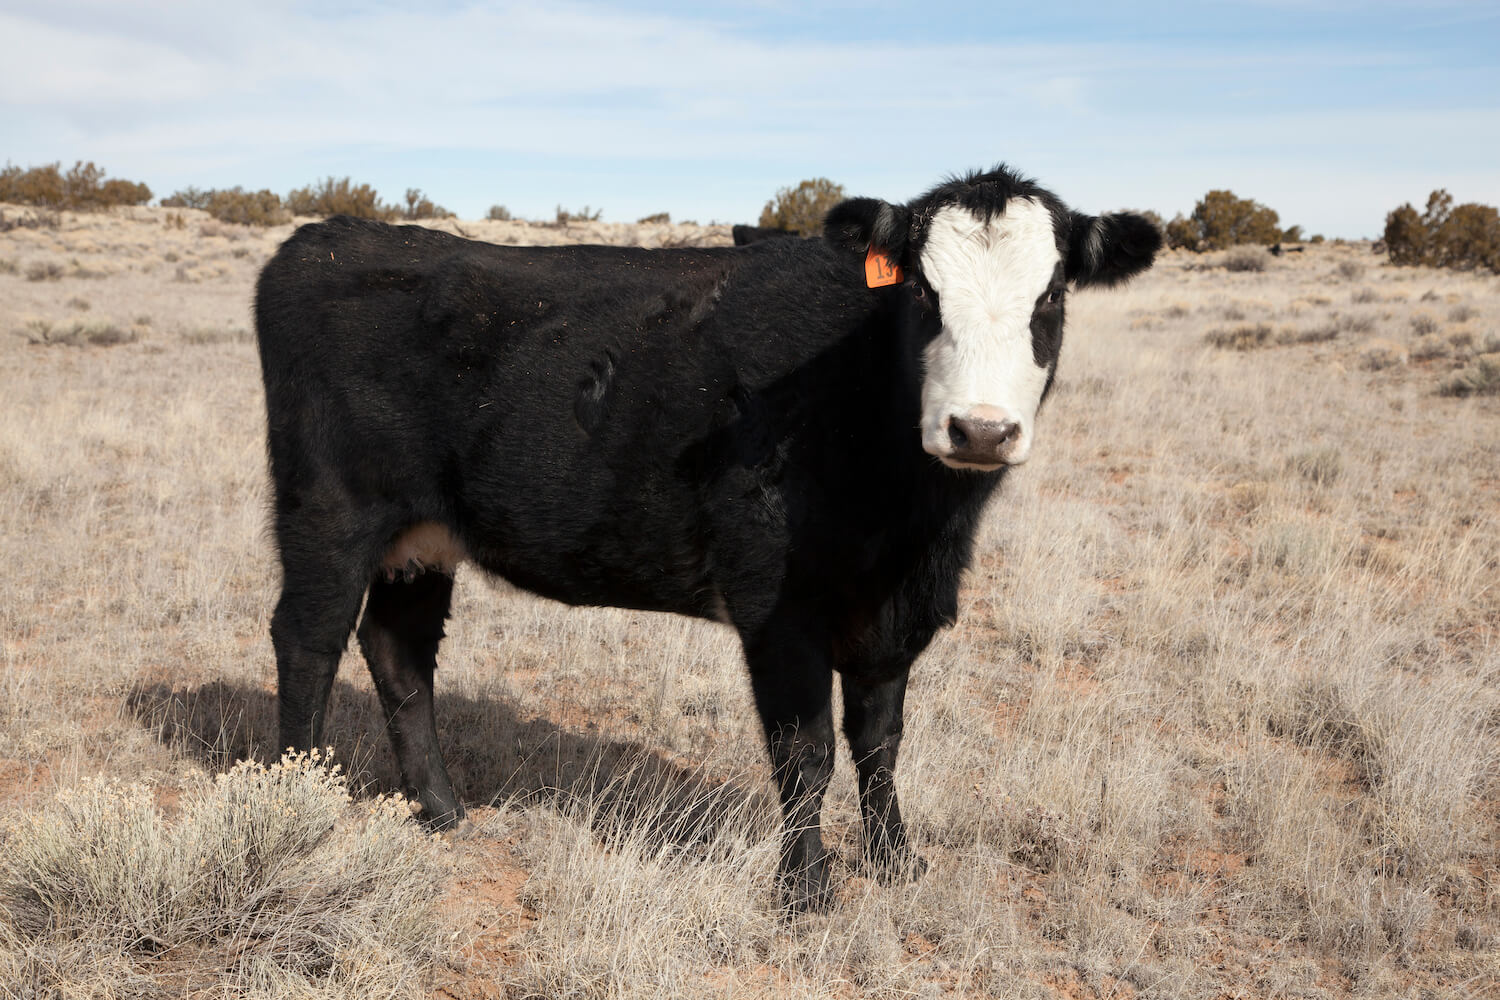 A dark brown and white cow looks at the camera. June 2020